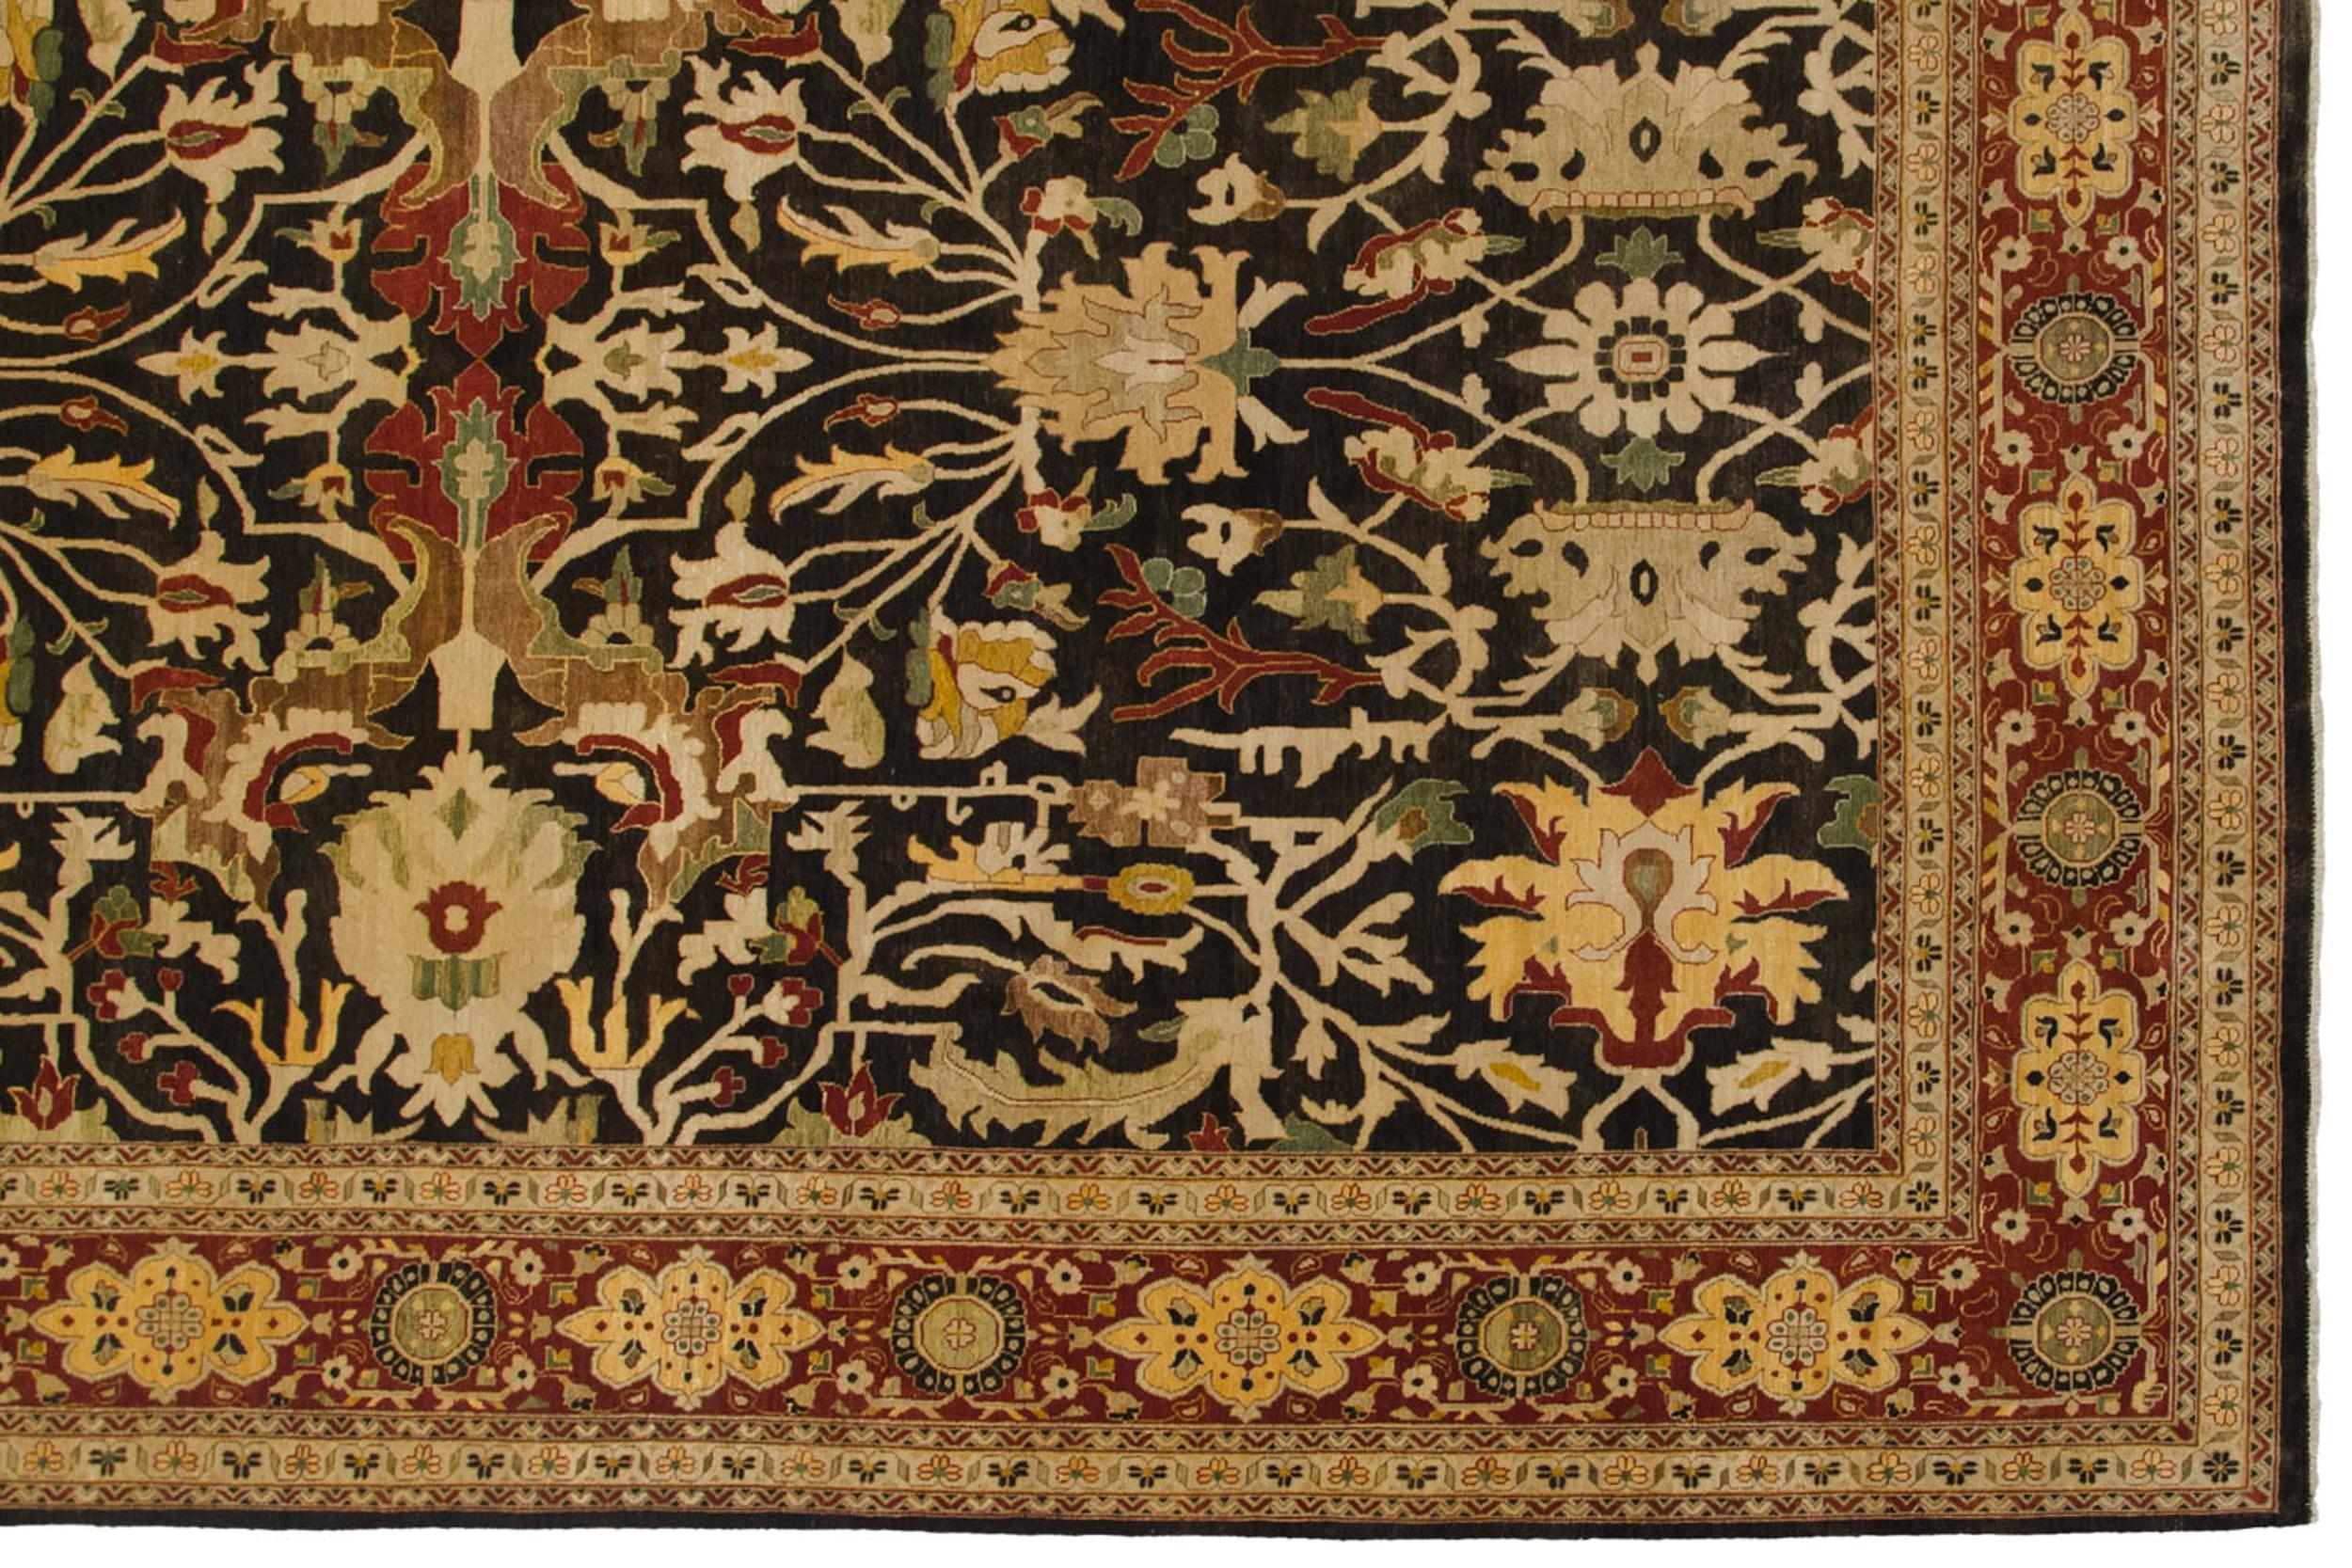 :: Finely knotted and exquisitely executed allover covered field in large scale floral palmettes interconnected by sprawling vinery adorned with large expressive leaves and budded blossoms. High quality soft wool with abrashes across. Colors and